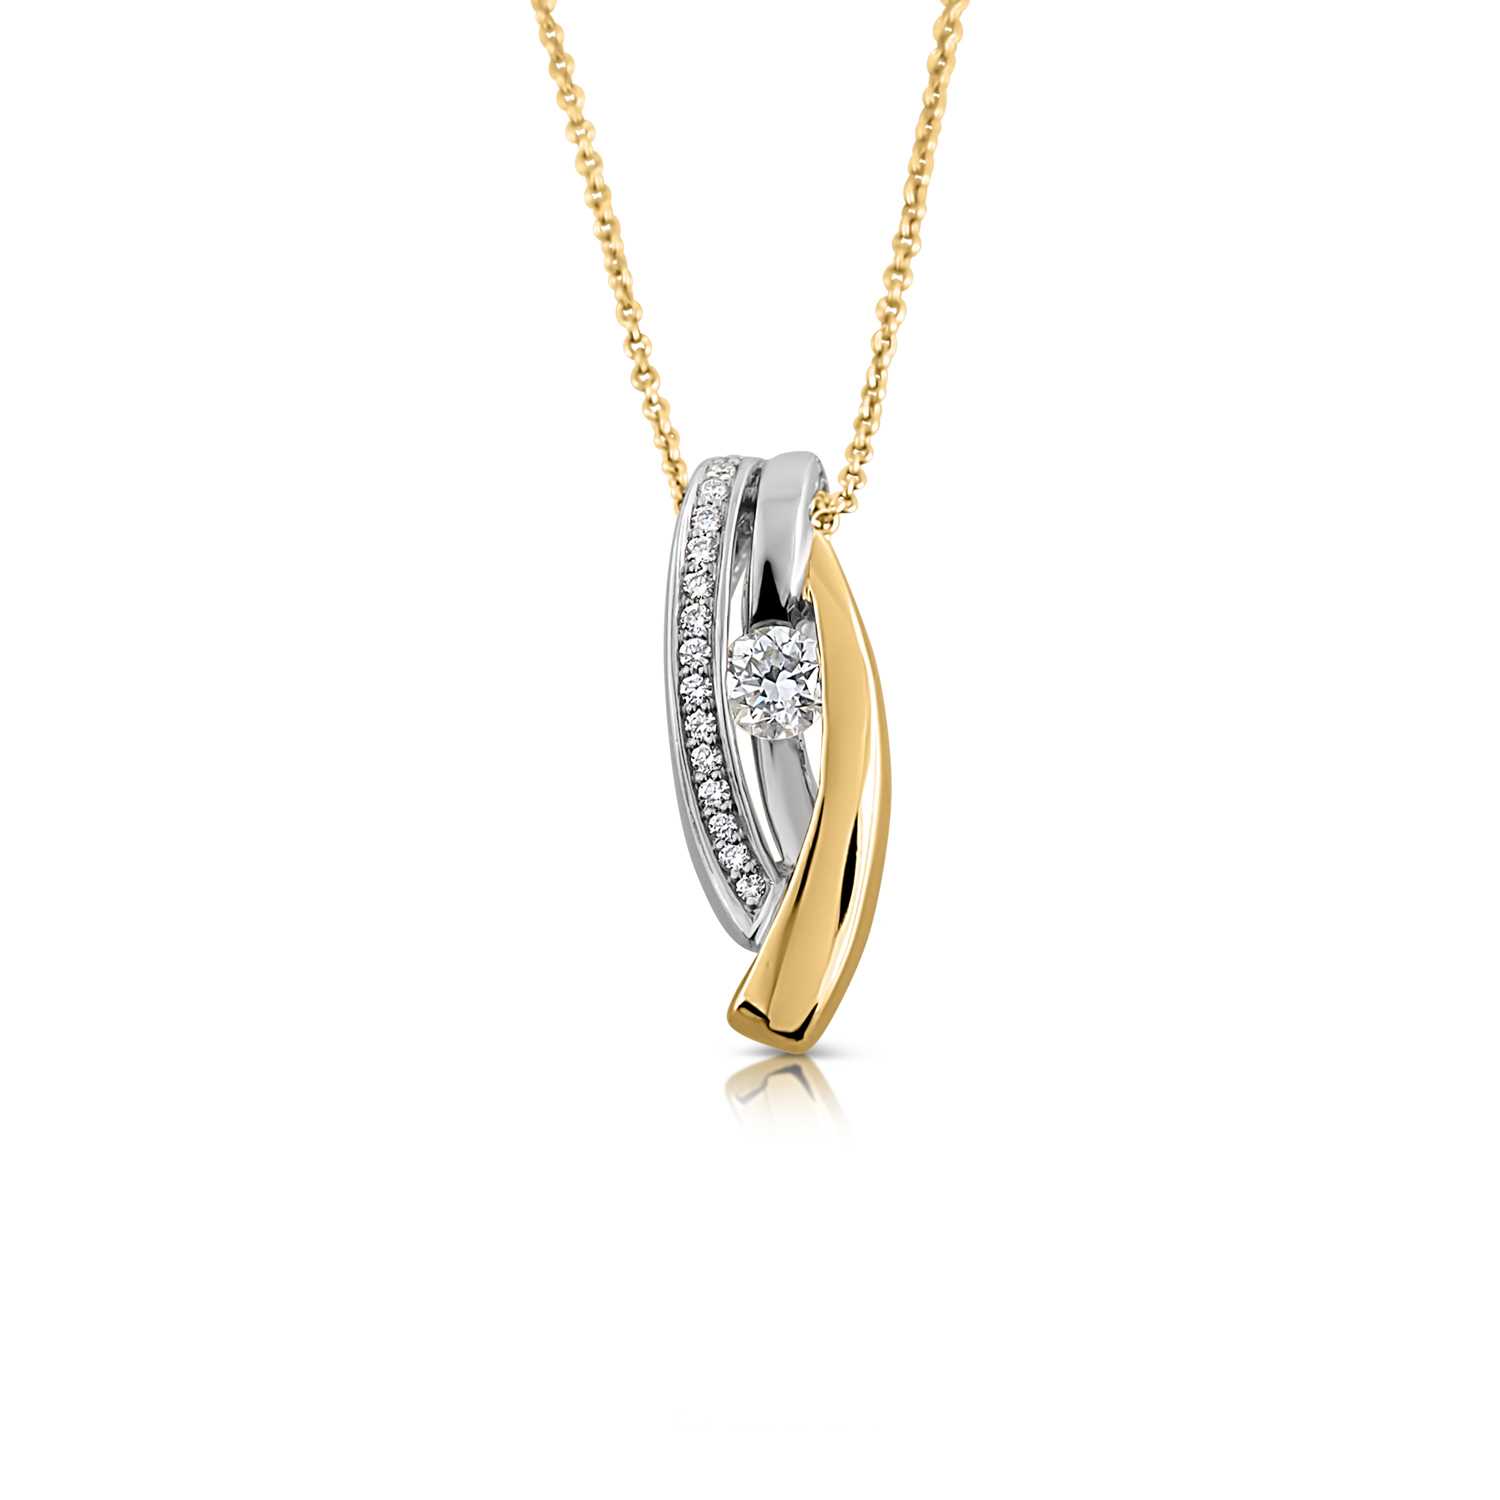 Lot 41 - White Gold Pendant with Diamonds on Gold Necklace